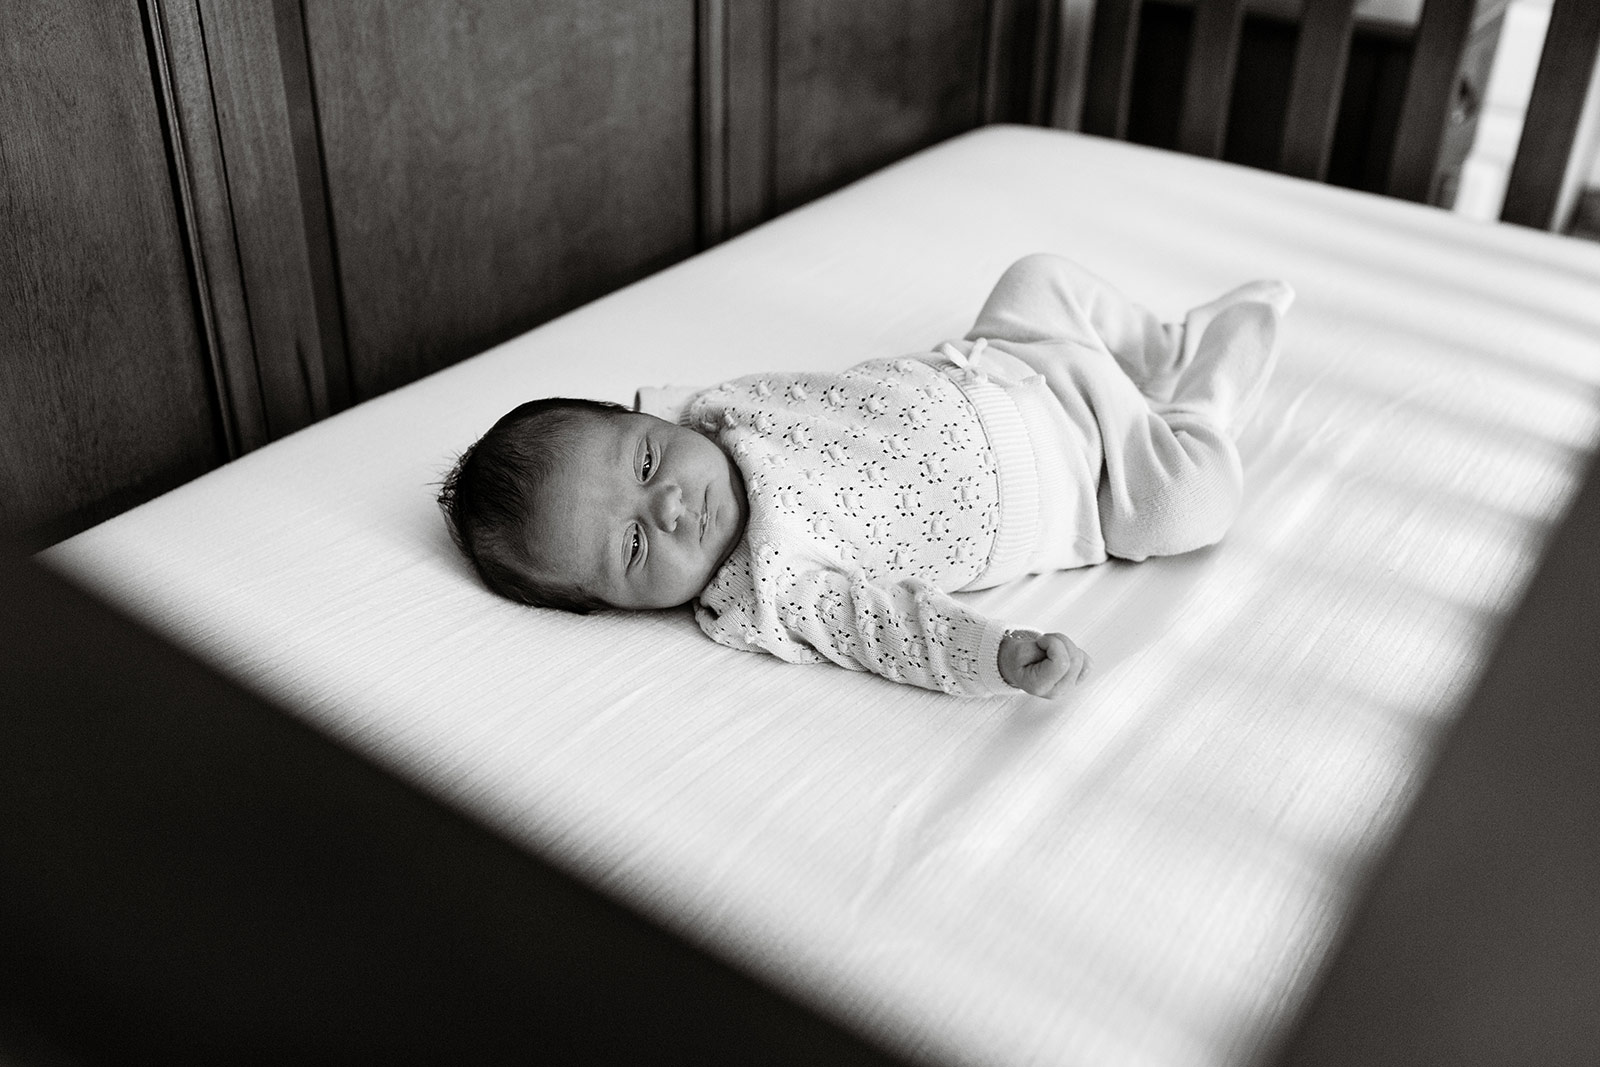 Baby Quinn rests in her crib.